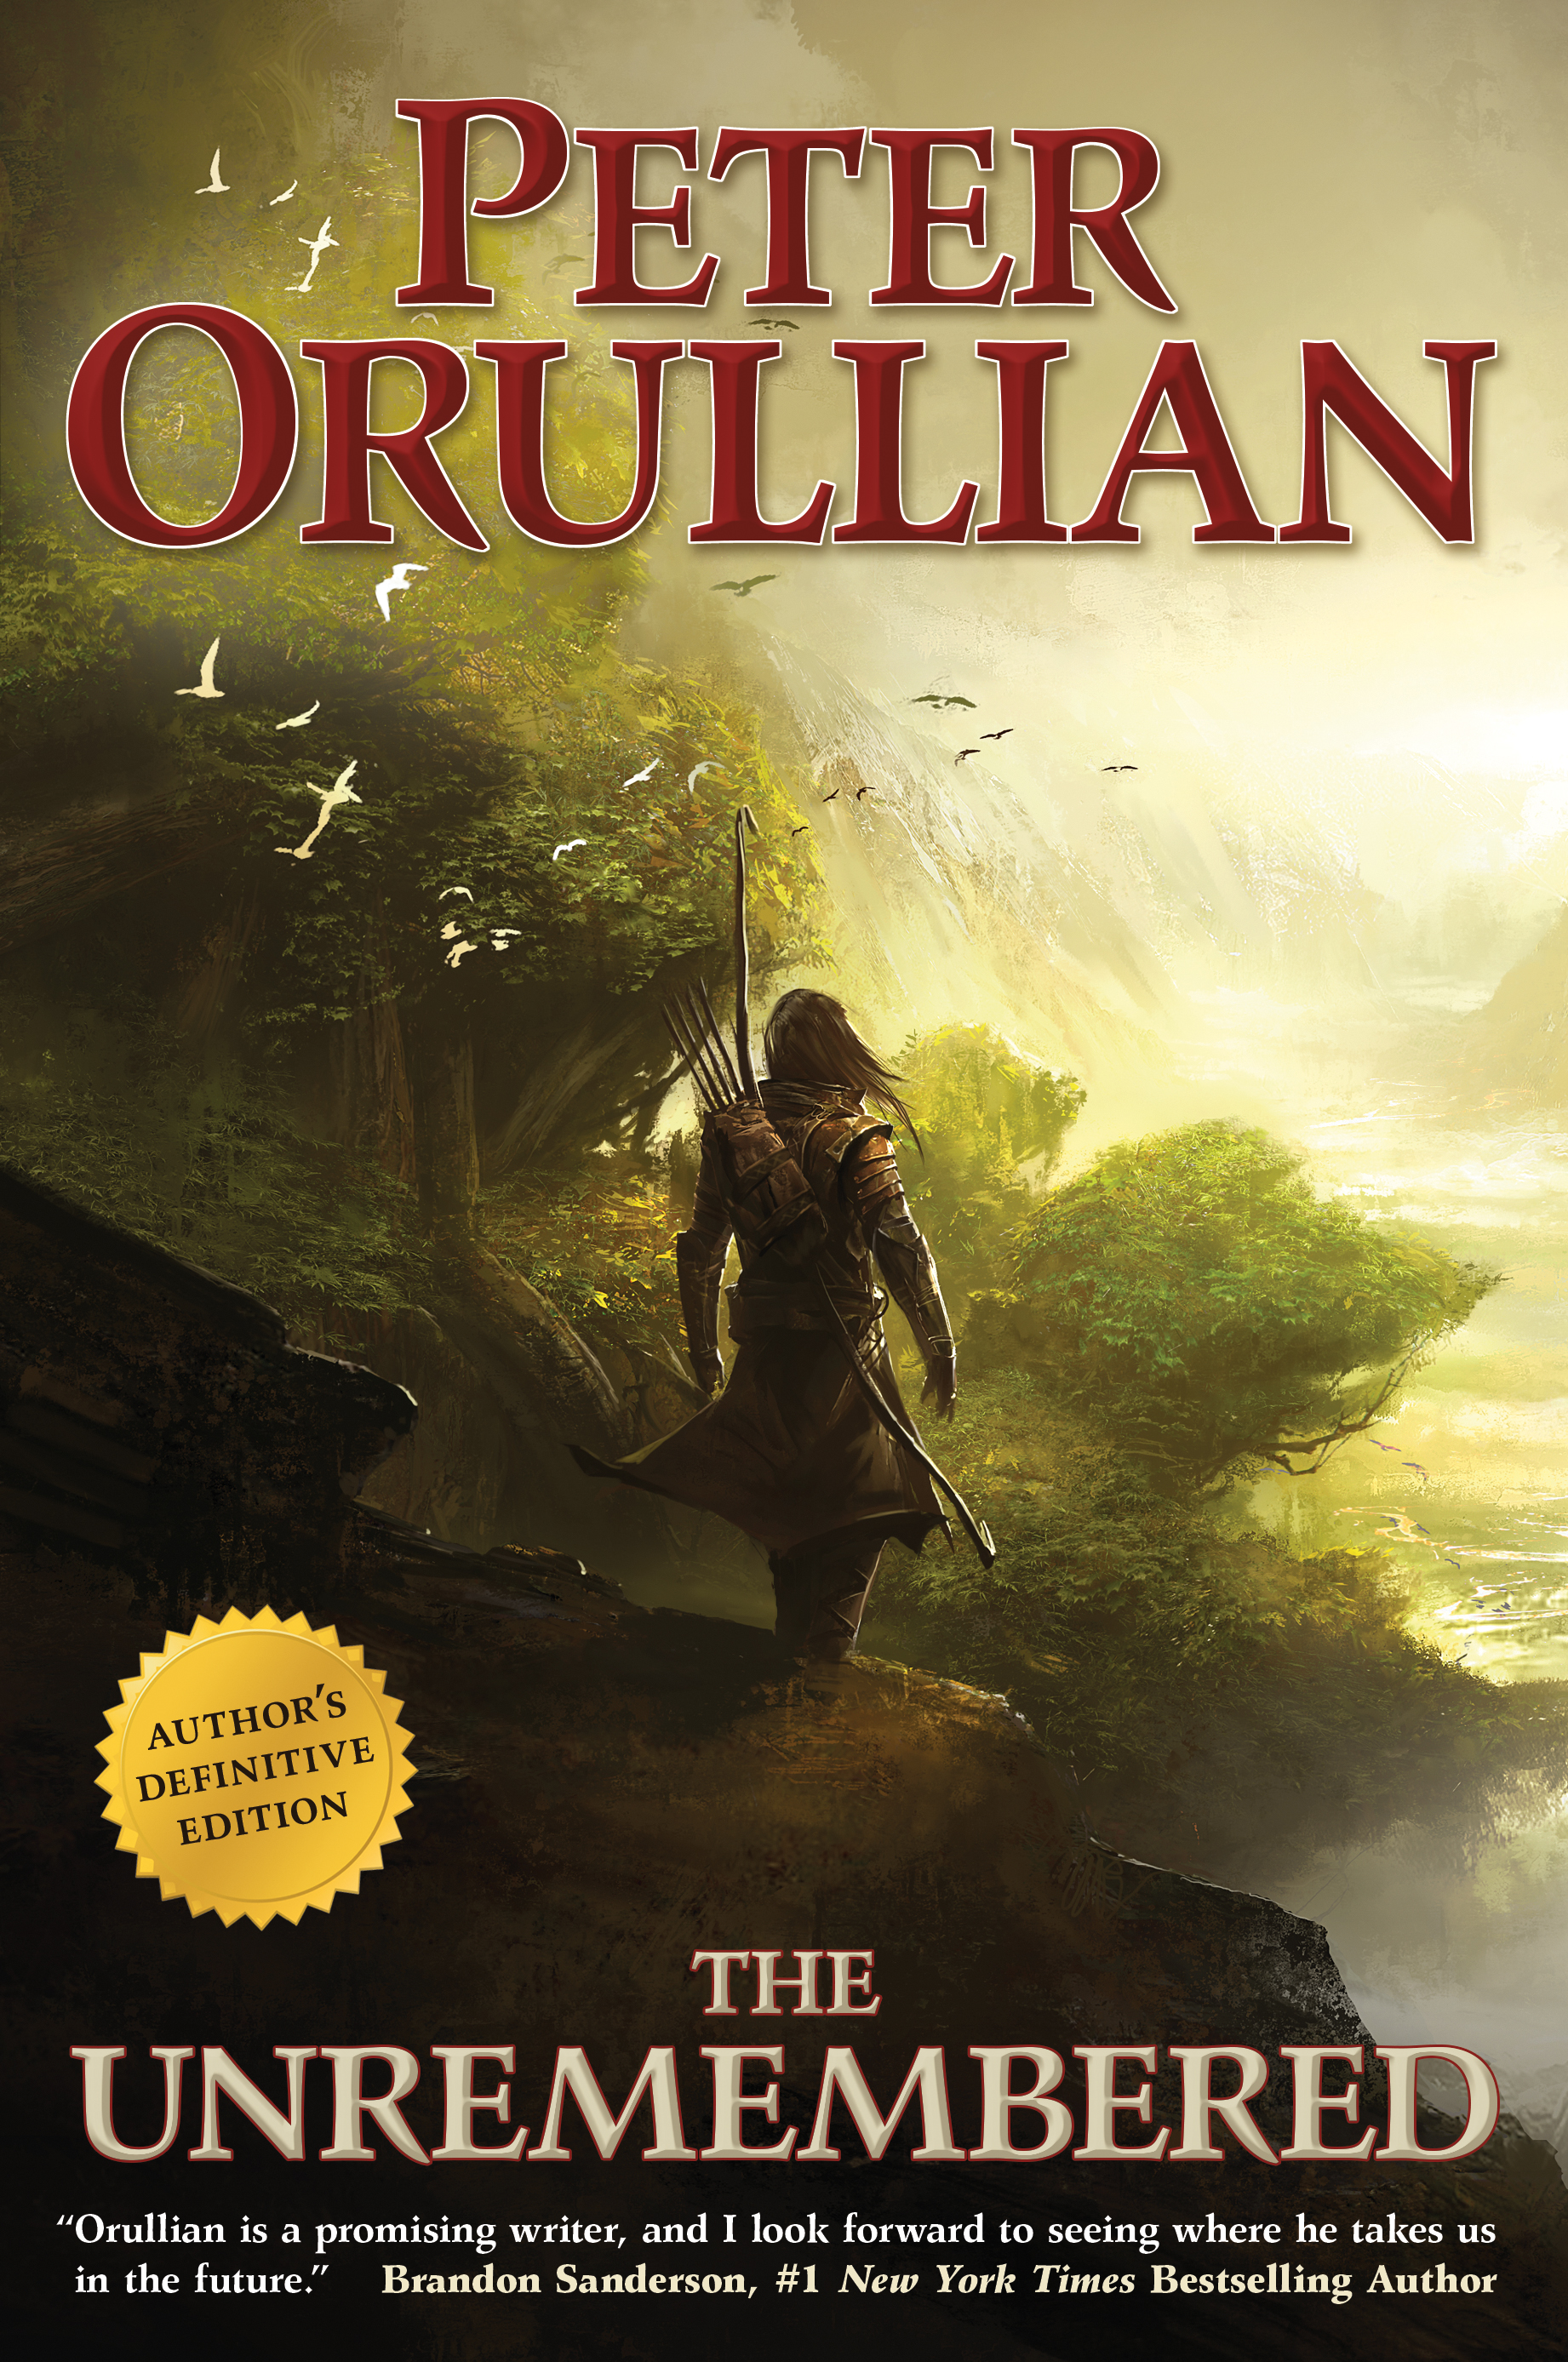 The Unremembered by Peter Orullian